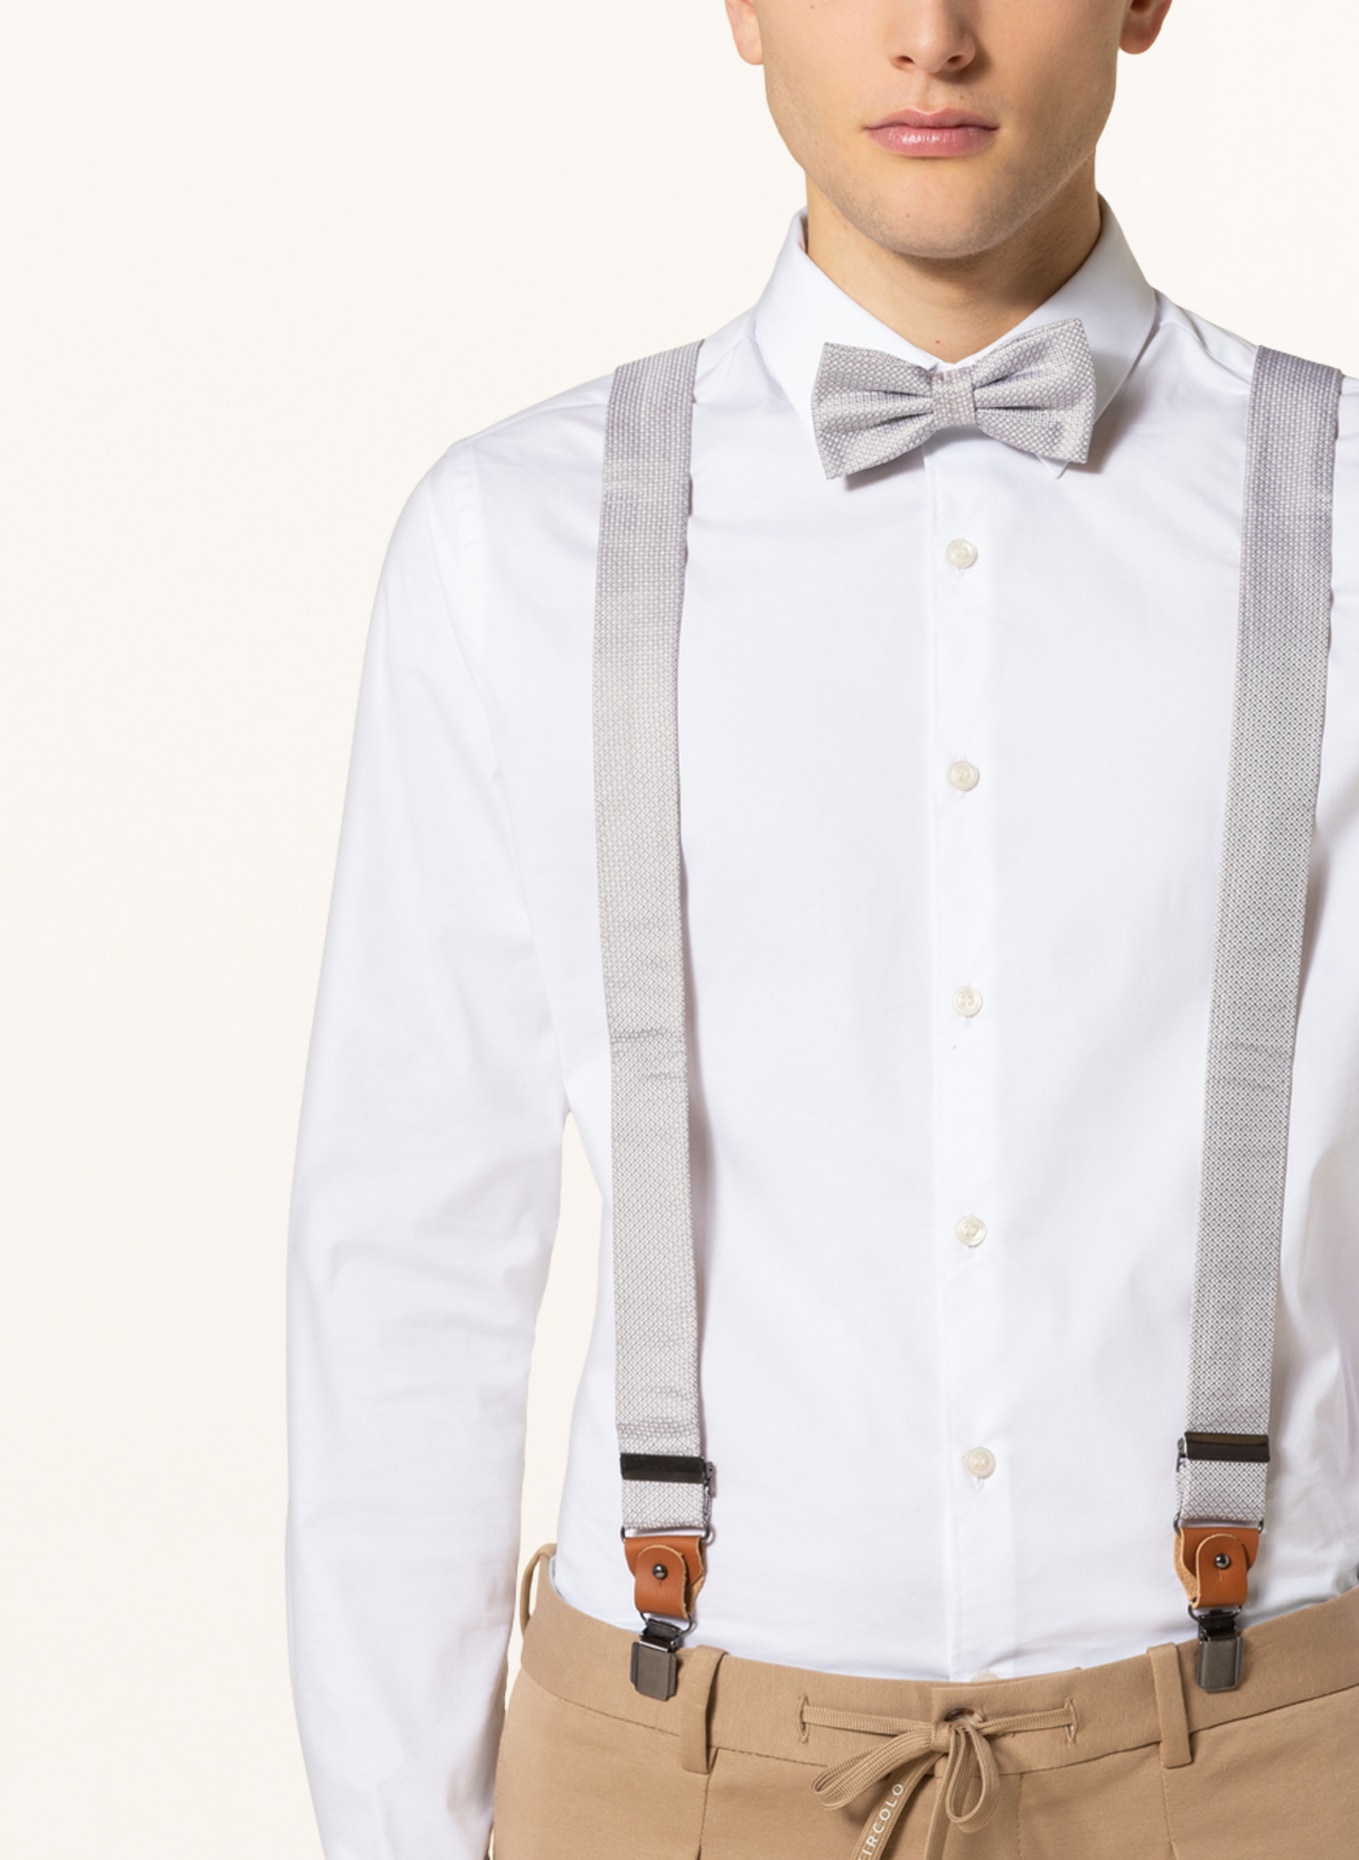 Prince BOWTIE Set: Suspenders and bow tie, Color: LIGHT GRAY (Image 4)